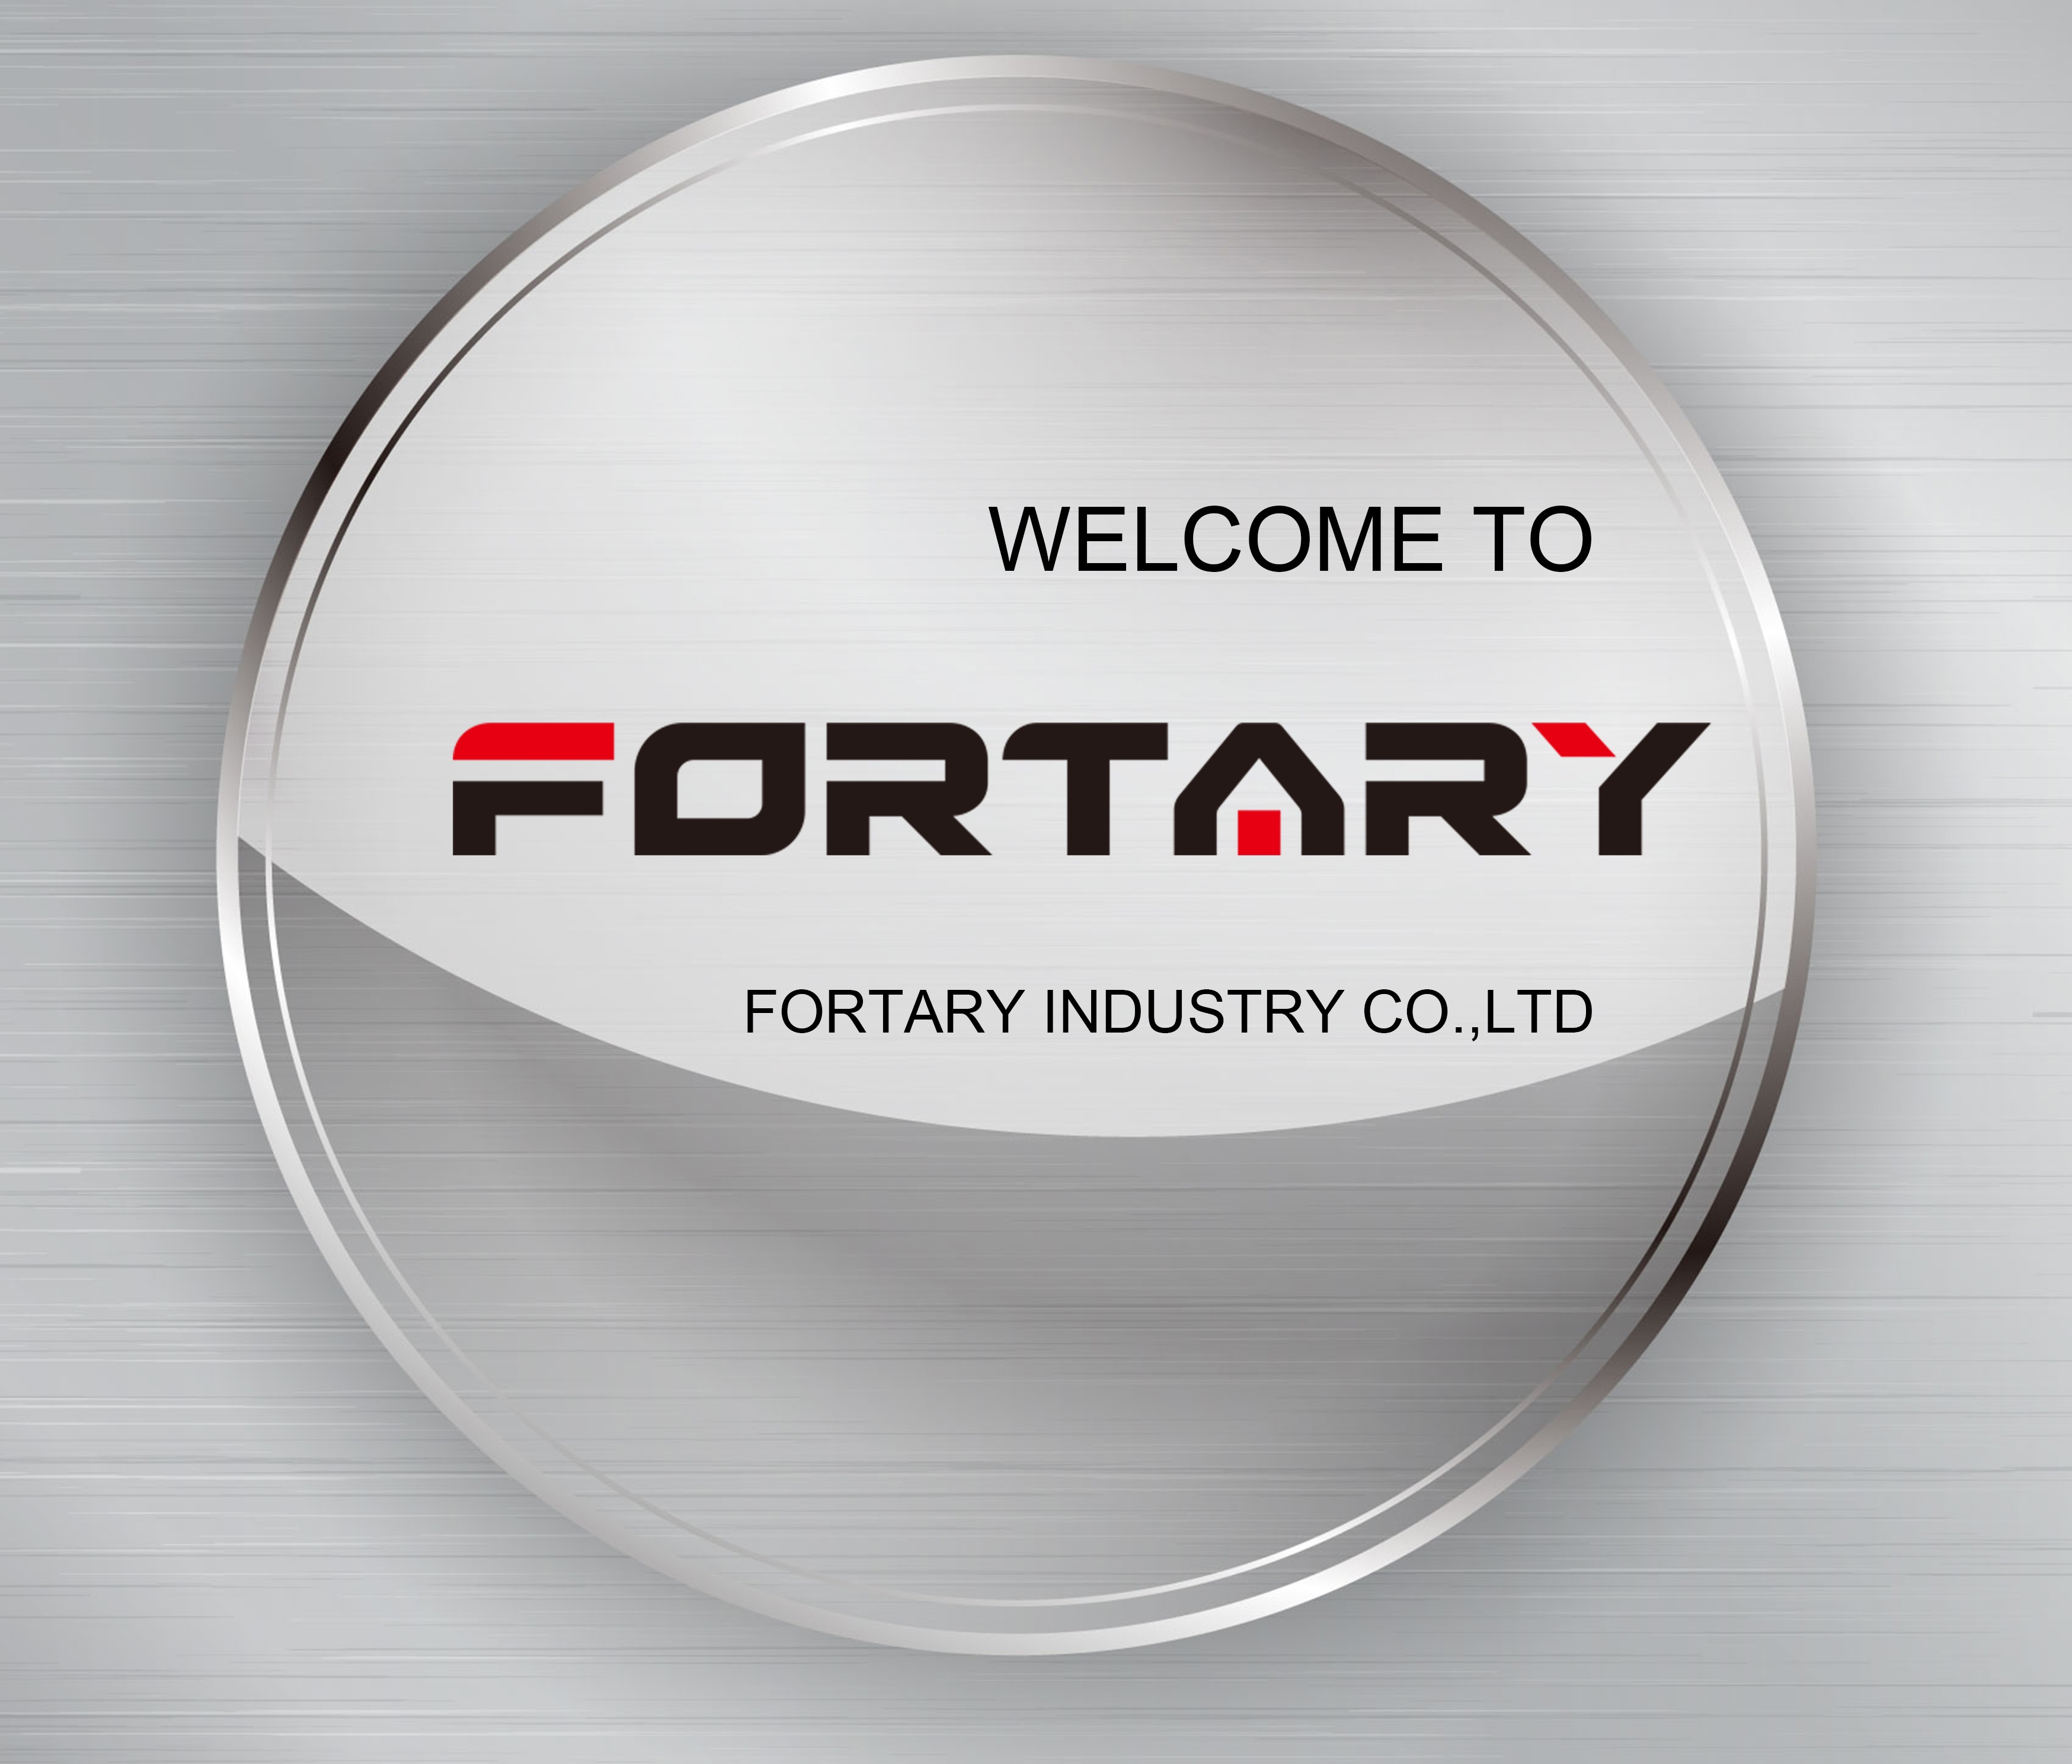 Video: 2 minutes to learn about fortary kitchenware.